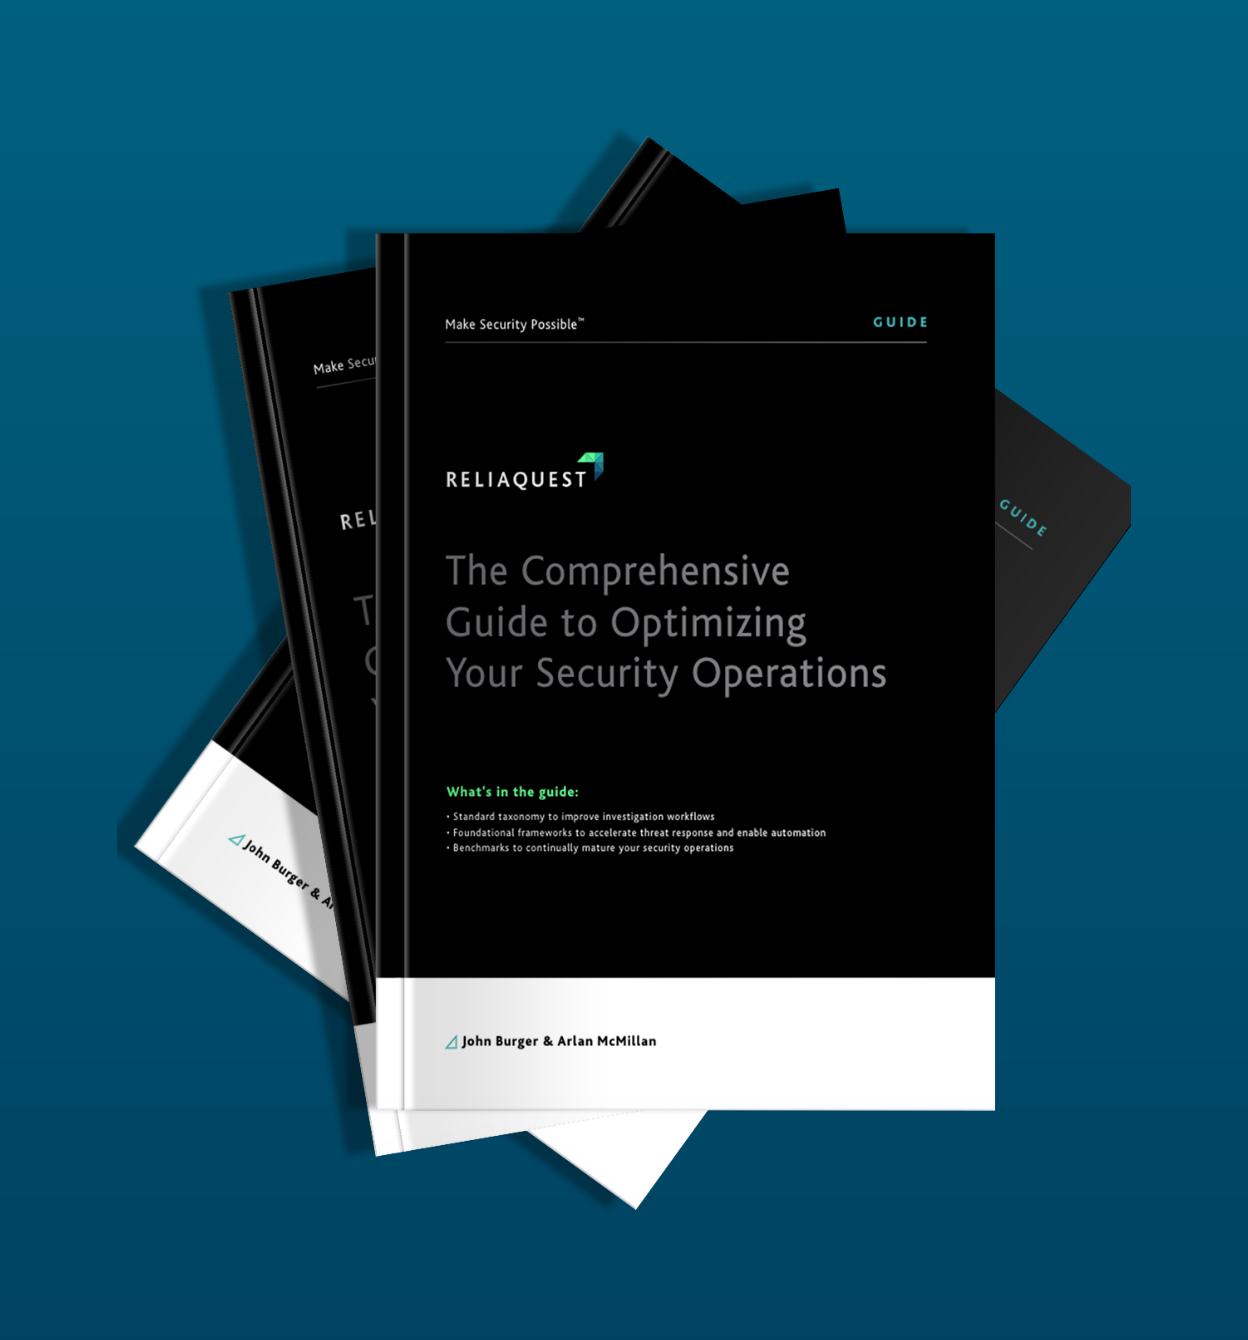 The Comprehensive Guide to Optimizing Your Security Operations